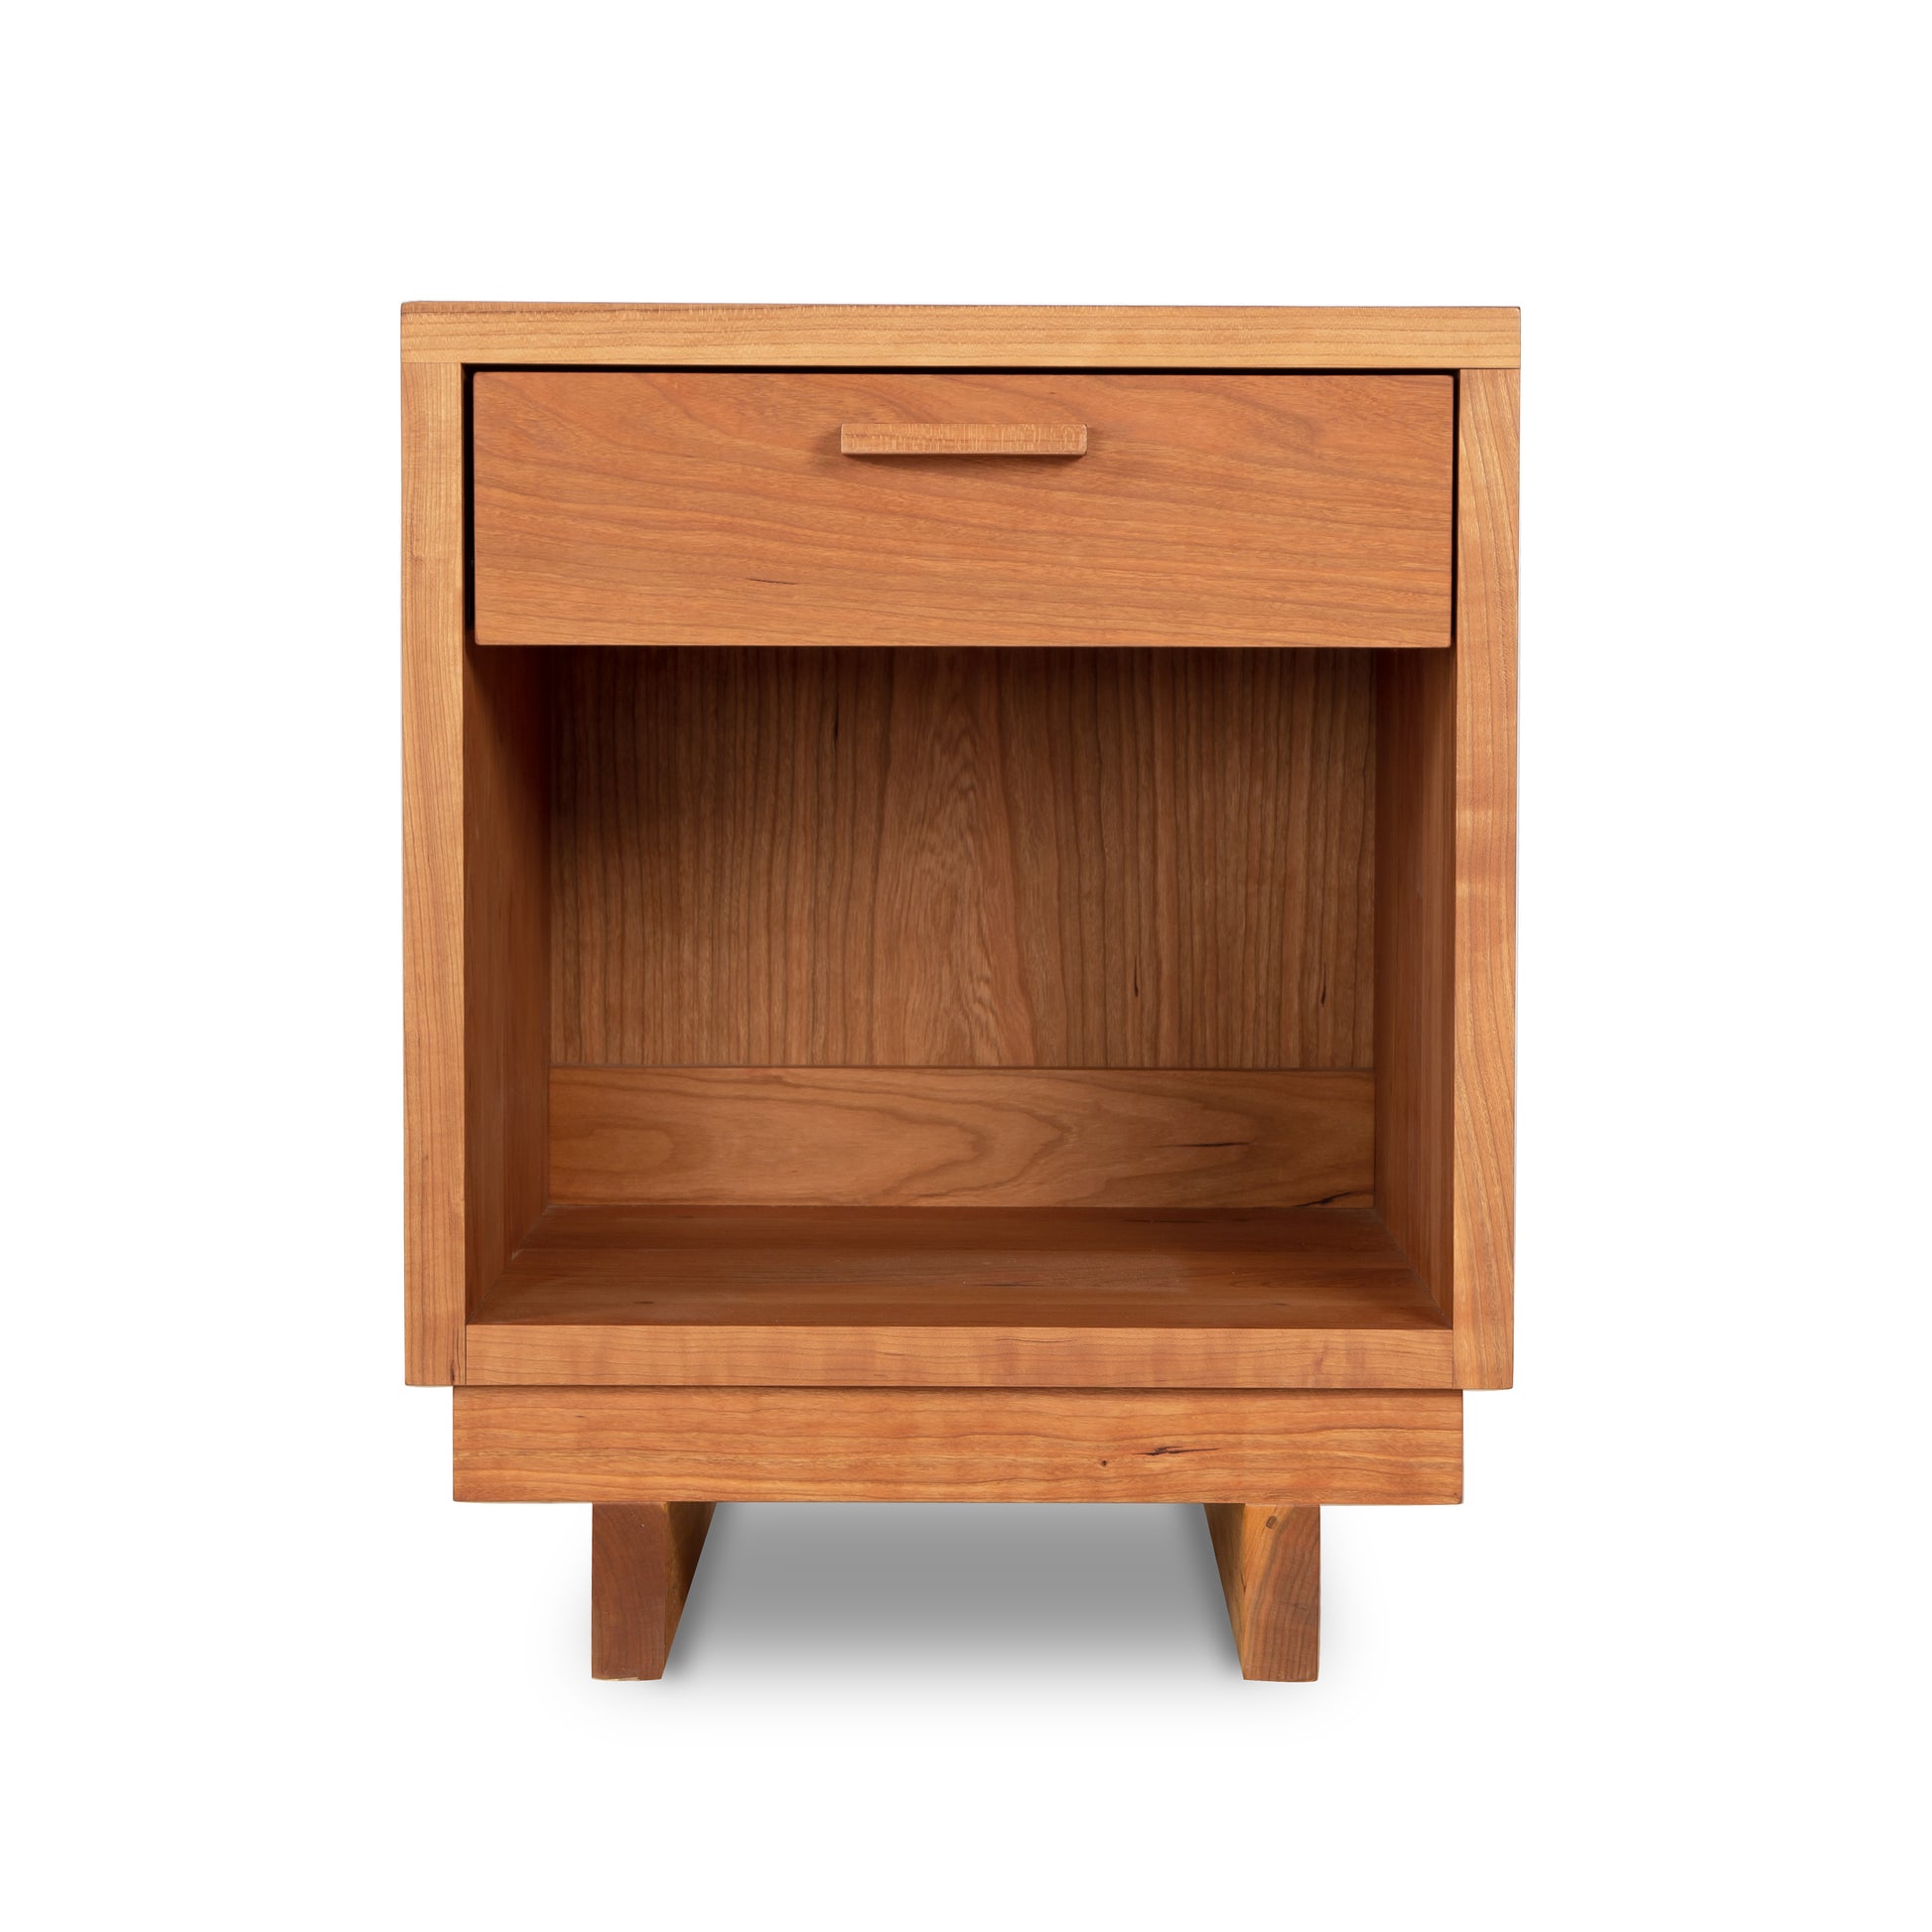 A modern Vermont Furniture Designs Loft 1-Drawer Enclosed Shelf Nightstand with a drawer on top.